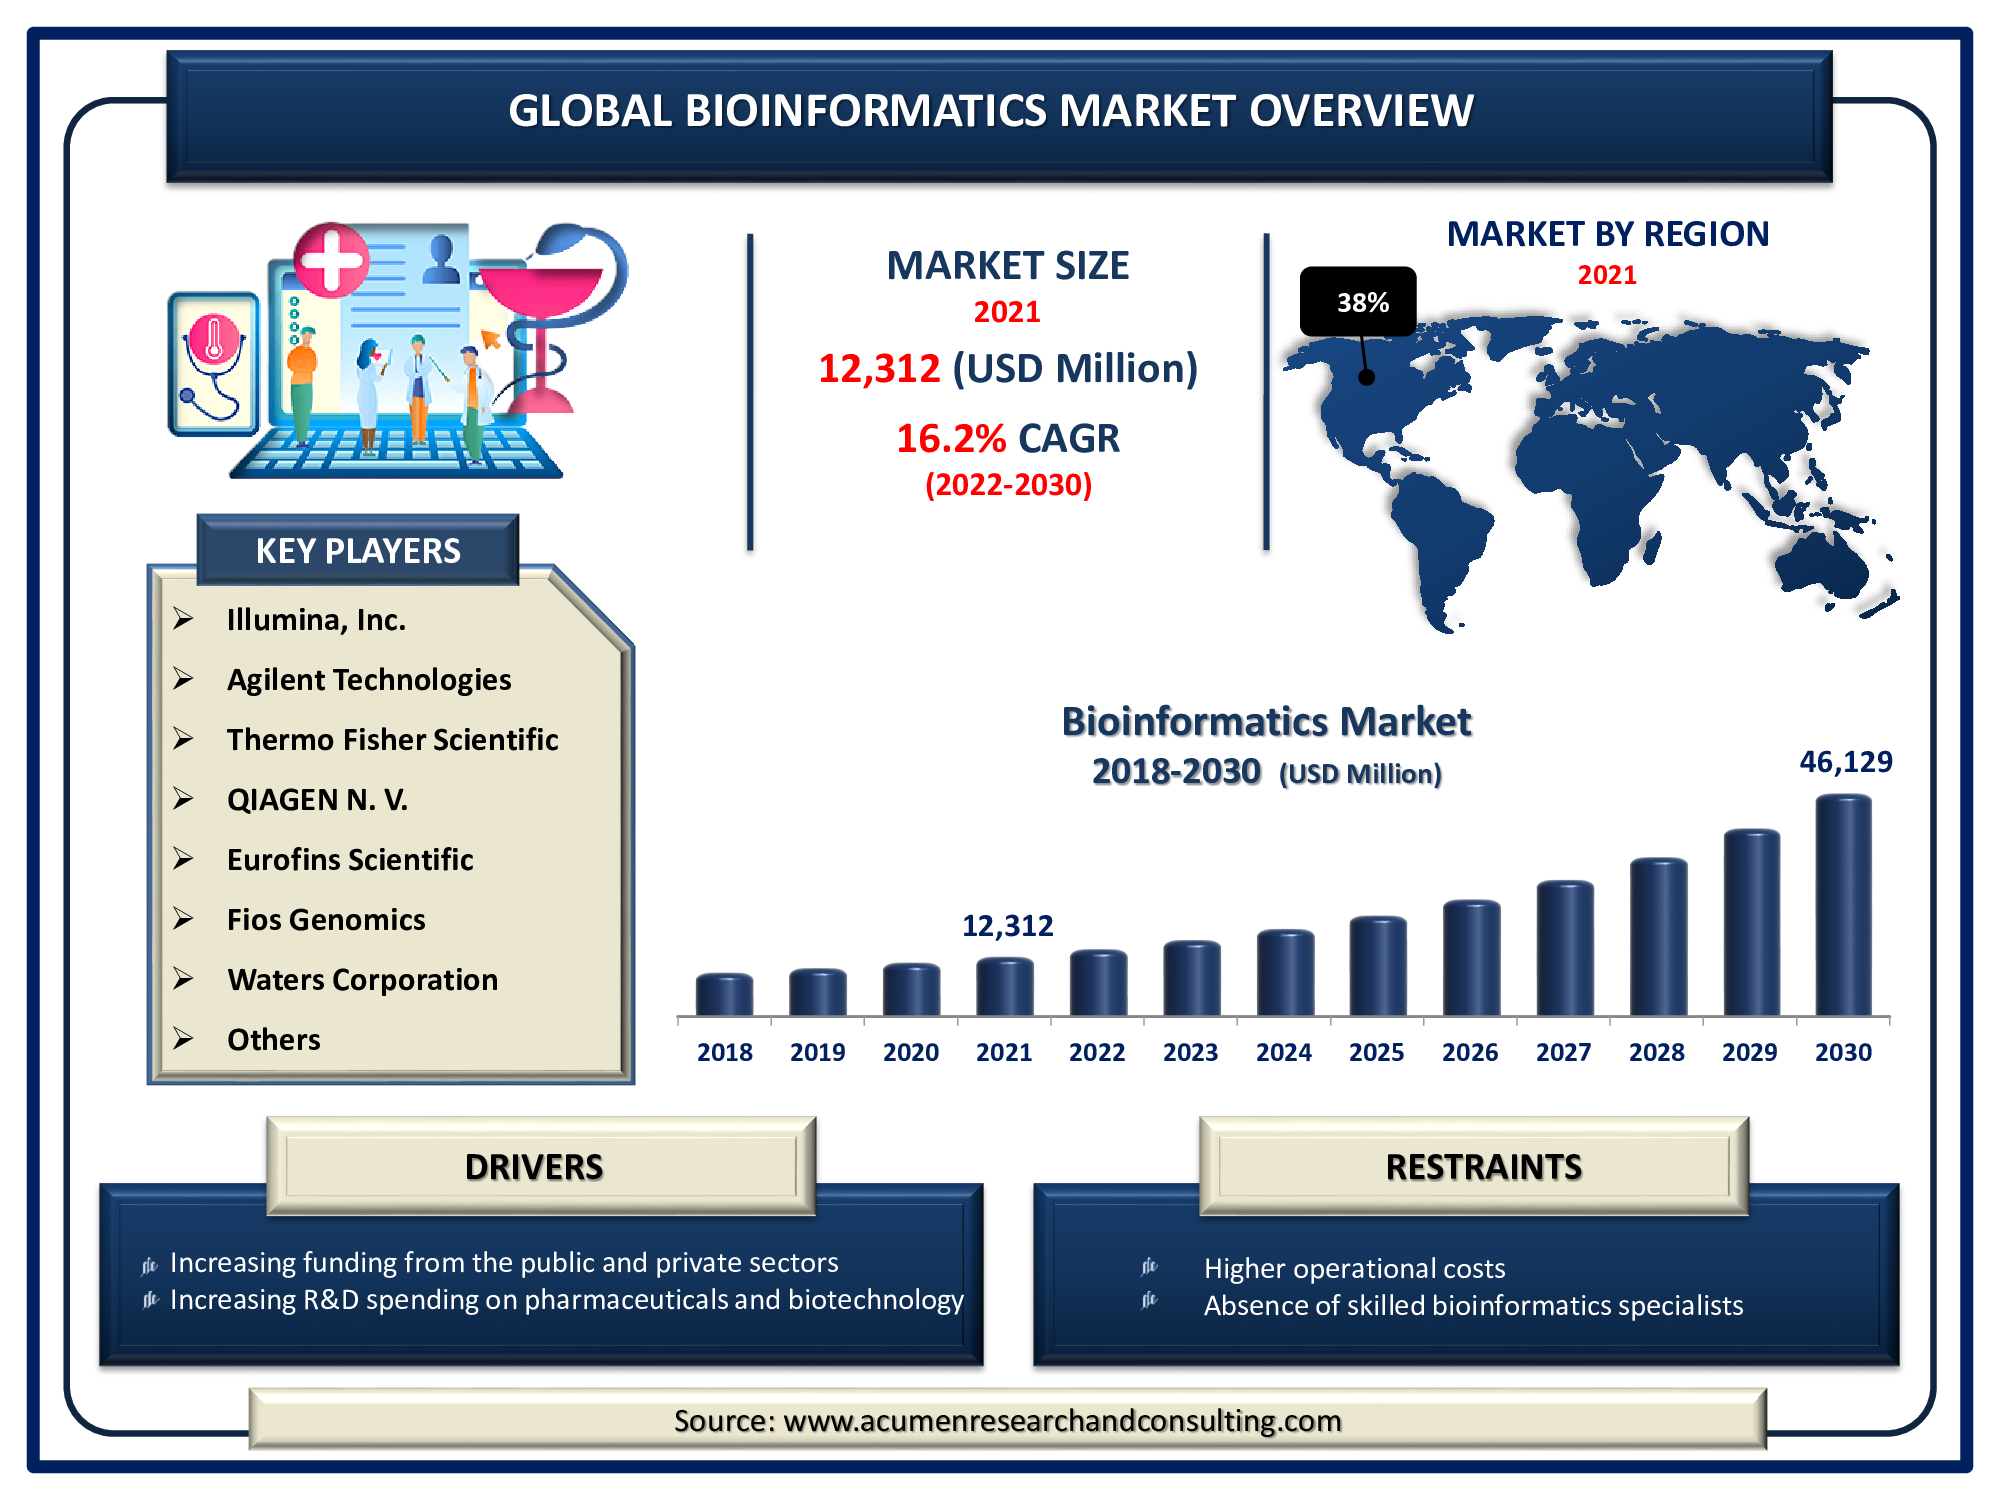 The Global Bioinformatics Market Size Accounted for USD 12,312 Million in 2021 and is predicted to be worth USD 46,129 Million by 2030, with a CAGR of 16.2% during the forthcoming period from 2022 to 2030.